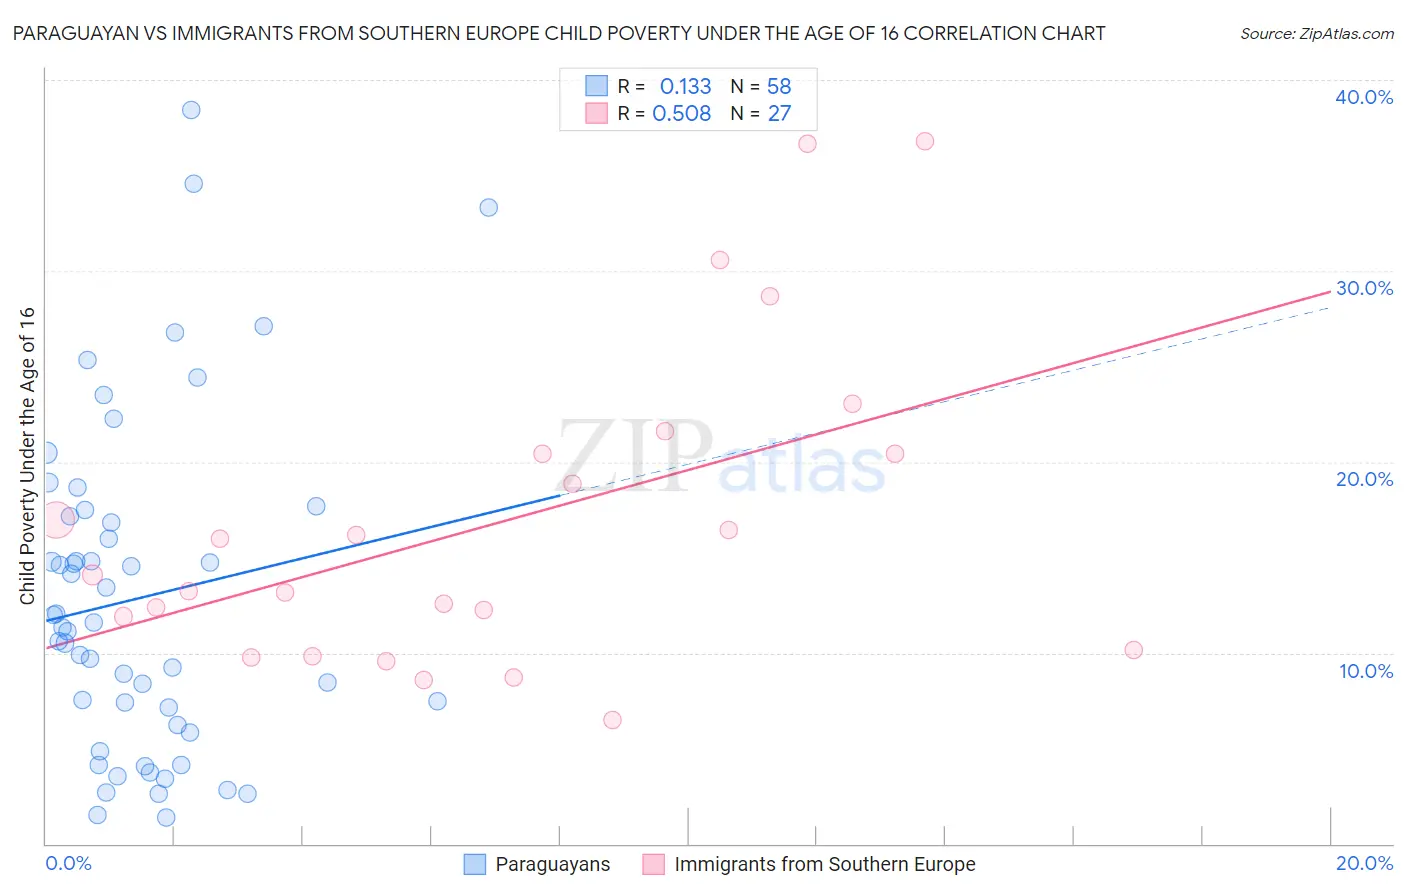 Paraguayan vs Immigrants from Southern Europe Child Poverty Under the Age of 16